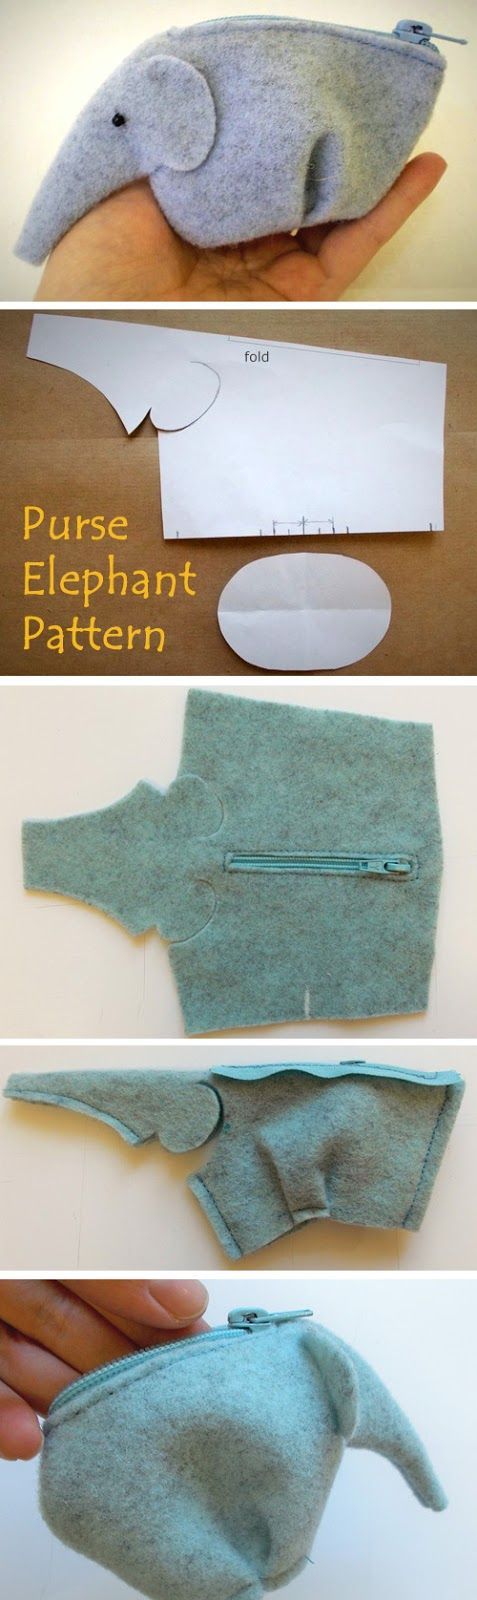 How to Sew Purse Elephant. Photo Sewing Tutorial…